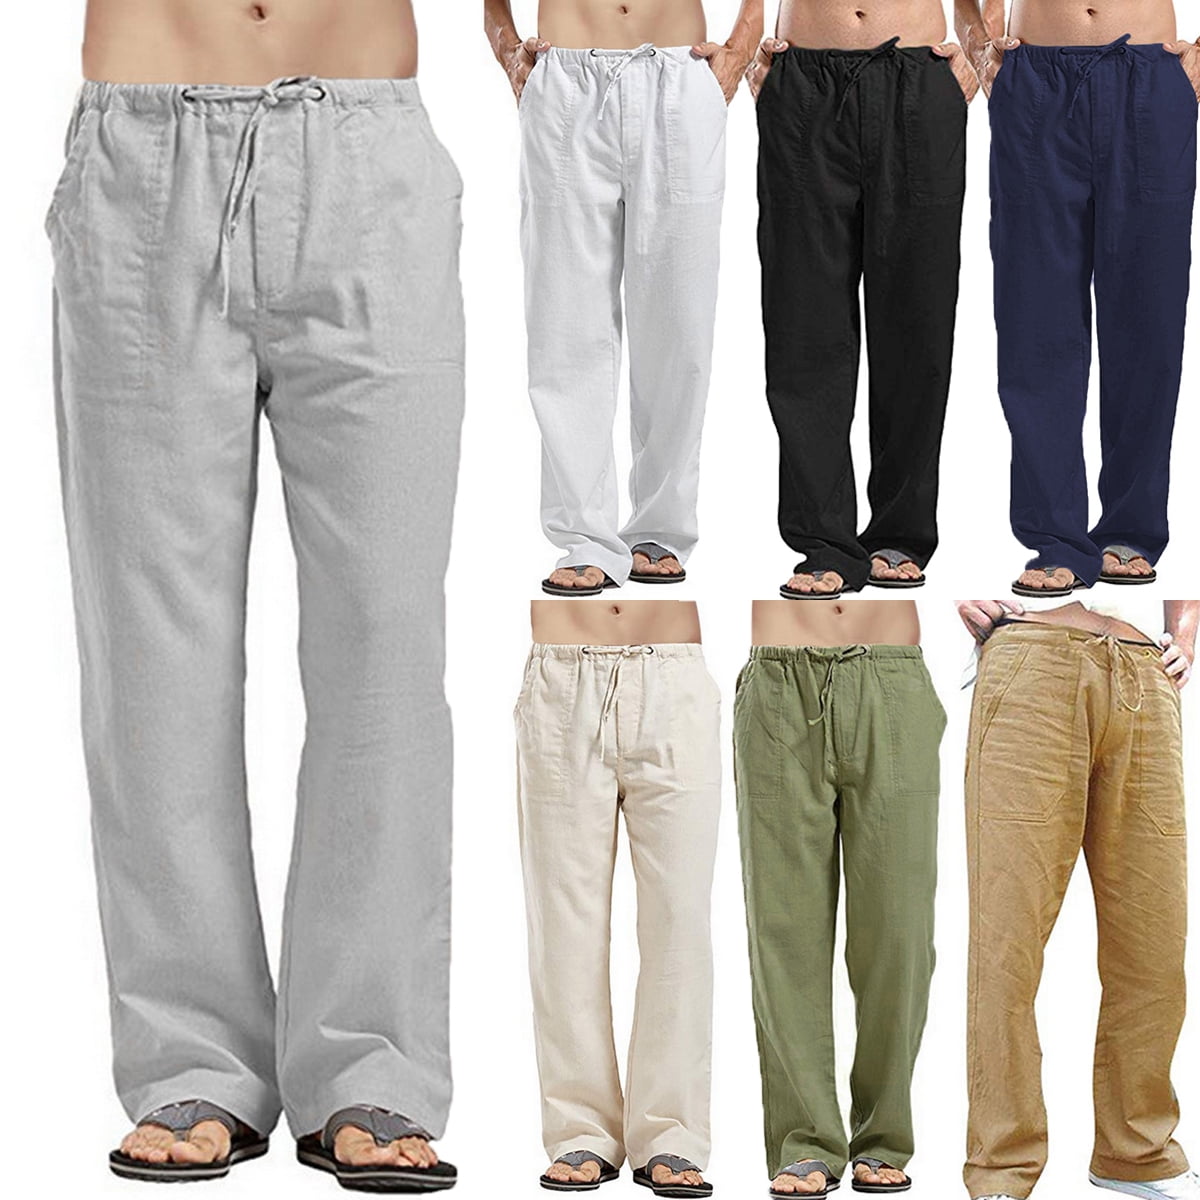 poundy Mens Drawstring Casual Beach Trousers Linen Summer Sports Pants